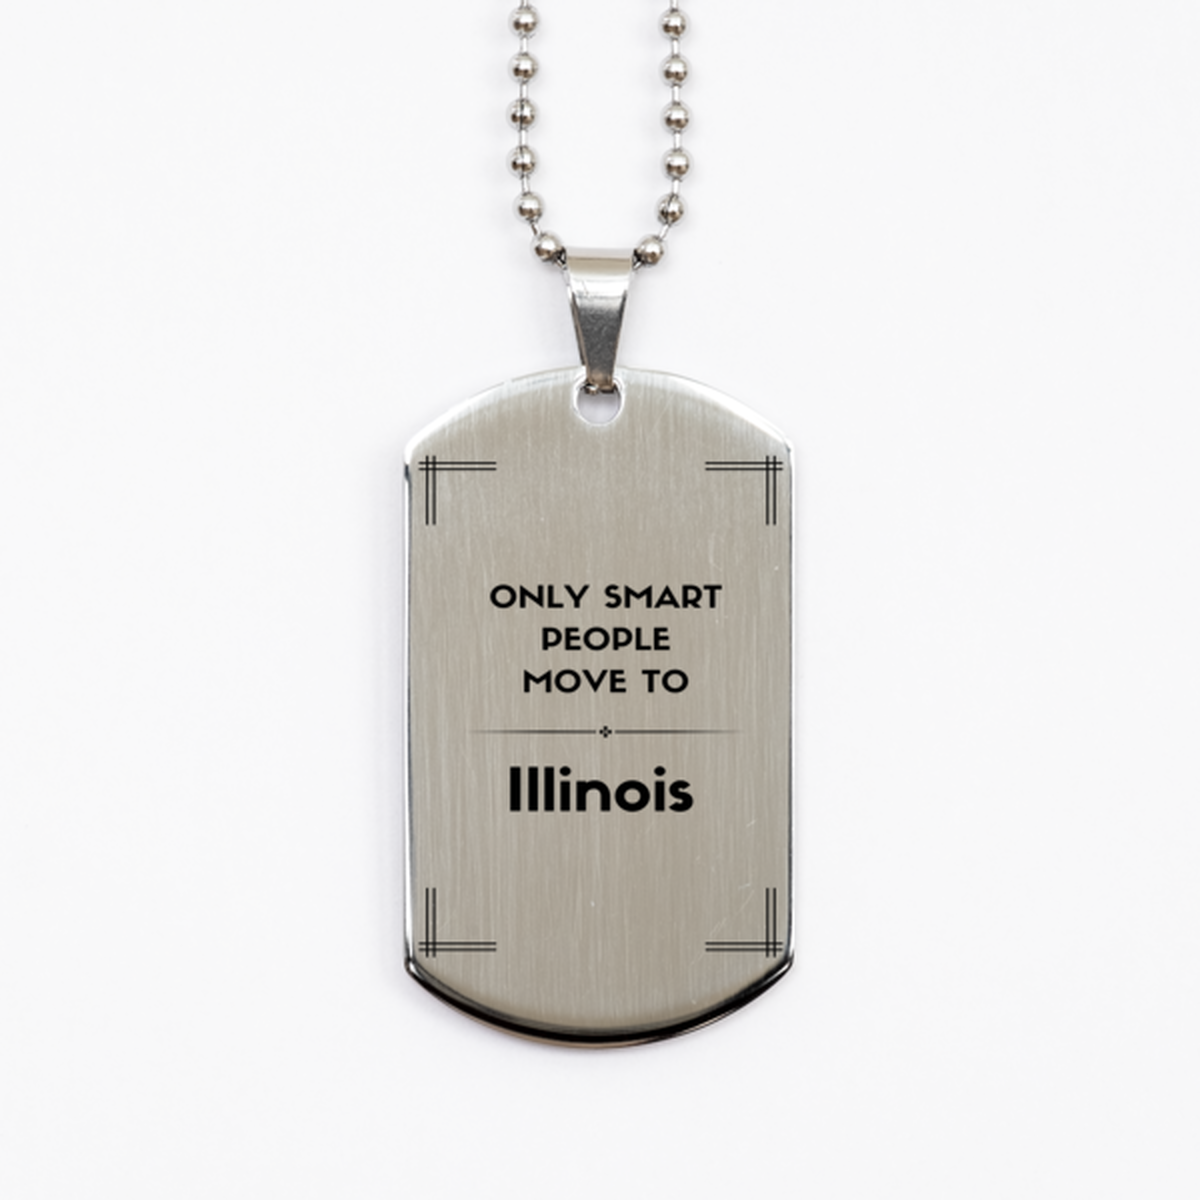 Only smart people move to Illinois Silver Dog Tag, Gag Gifts For Illinois, Move to Illinois Gifts for Friends Coworker Funny Saying Quote